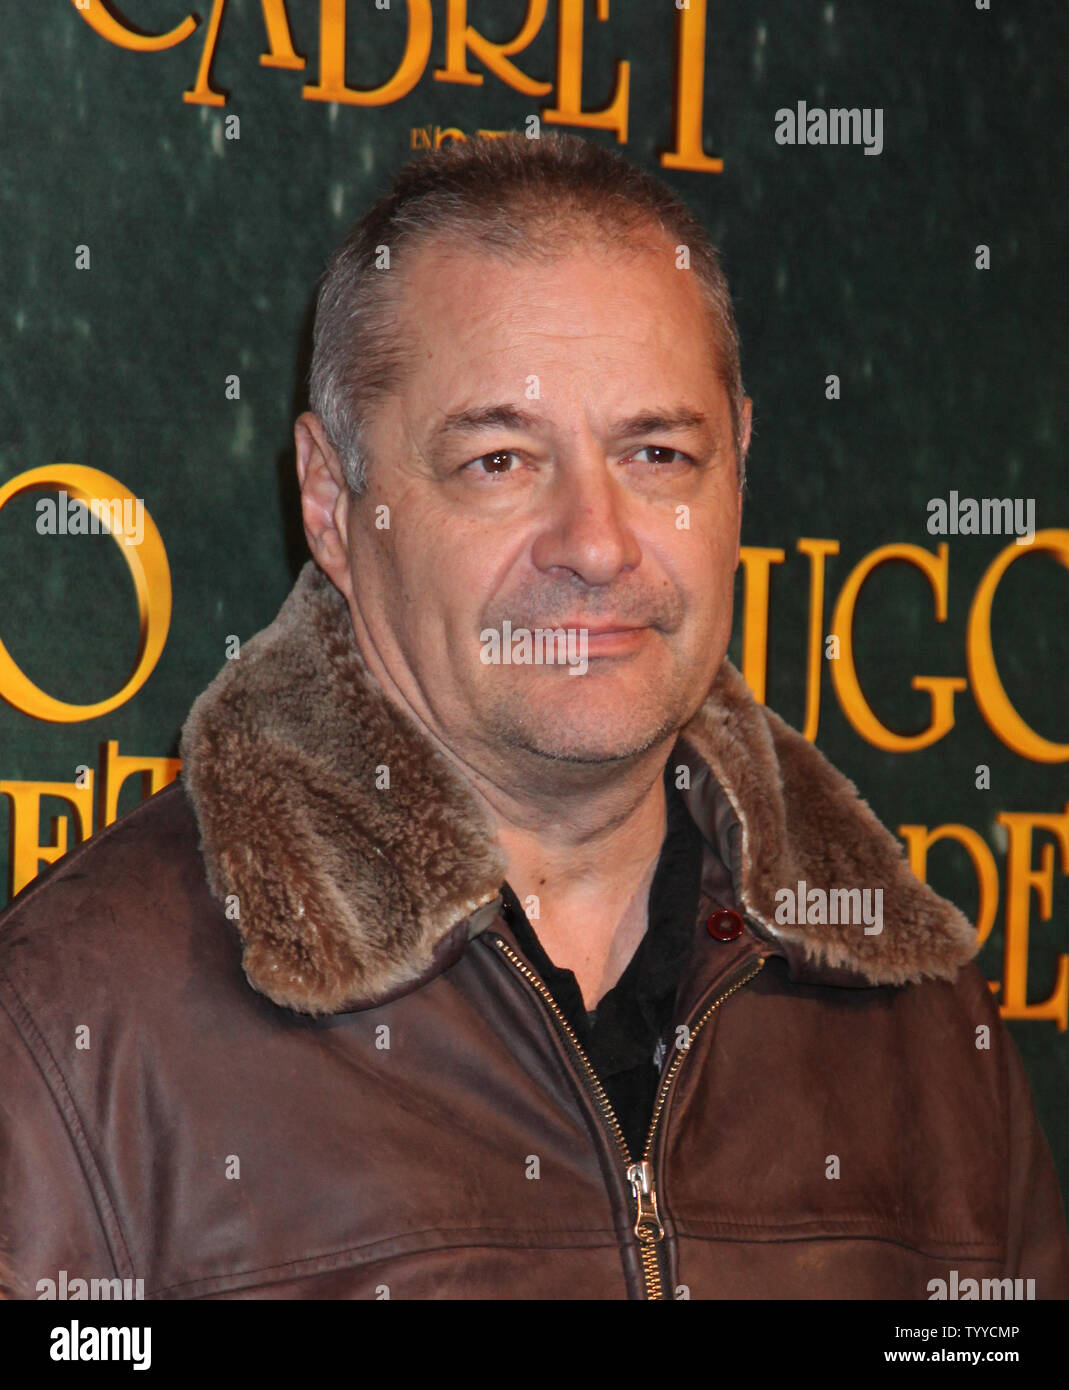 Jean-Pierre Jeunet arrives for the French premiere of the film "Hugo  Cabret" in Paris on December 6, 2011. UPI/David Silpa Stock Photo - Alamy